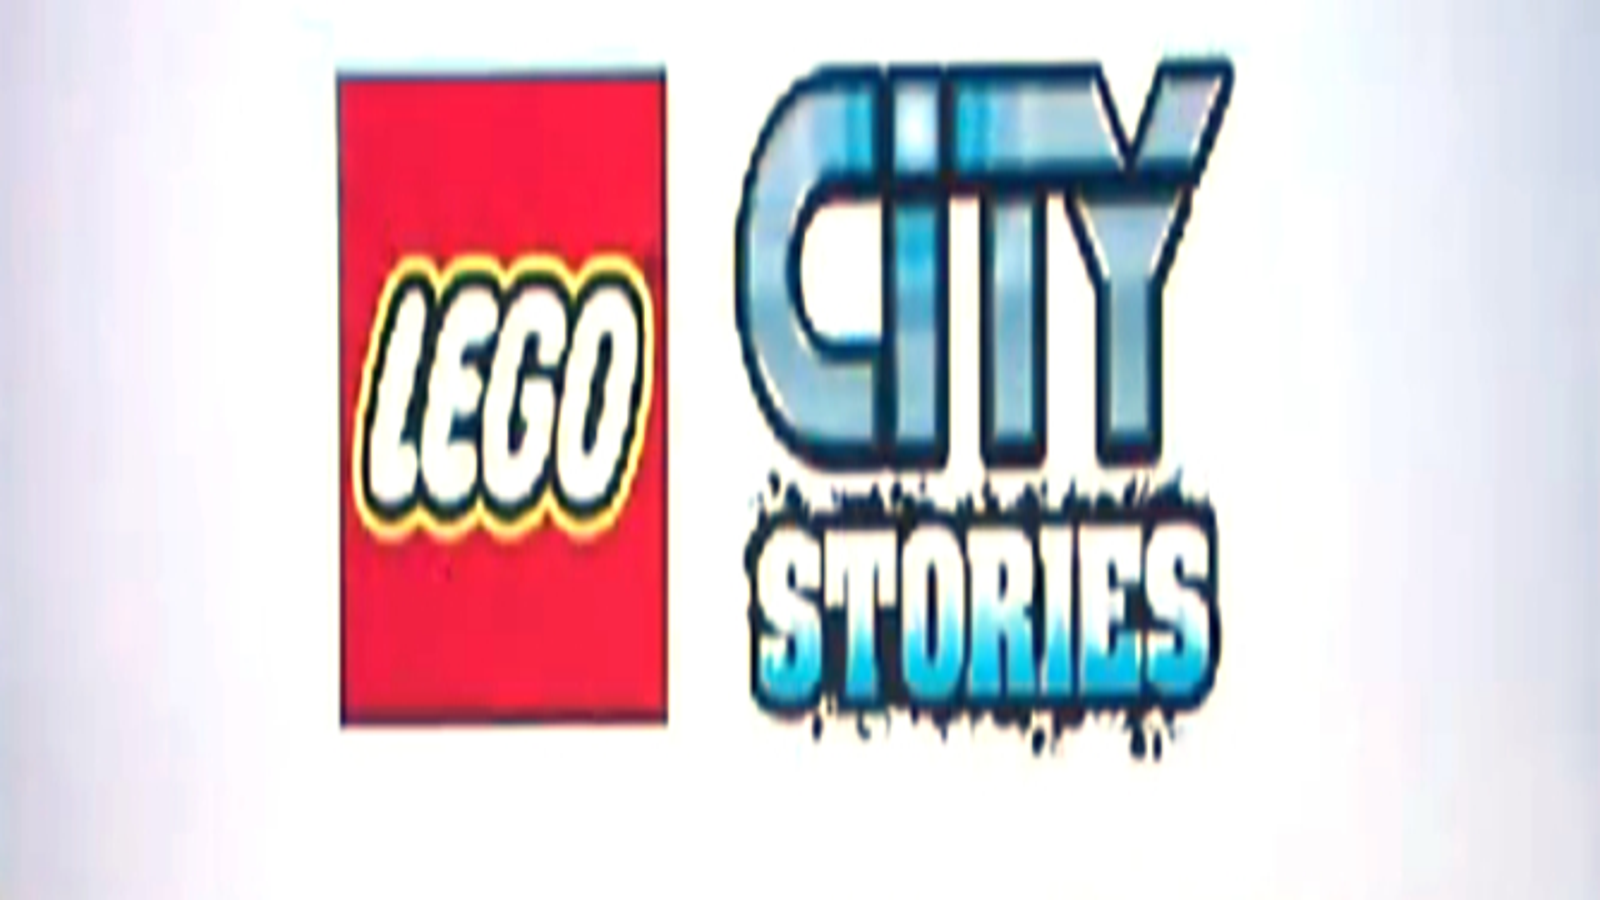 Lego City Stories for 2012 launch | VG247